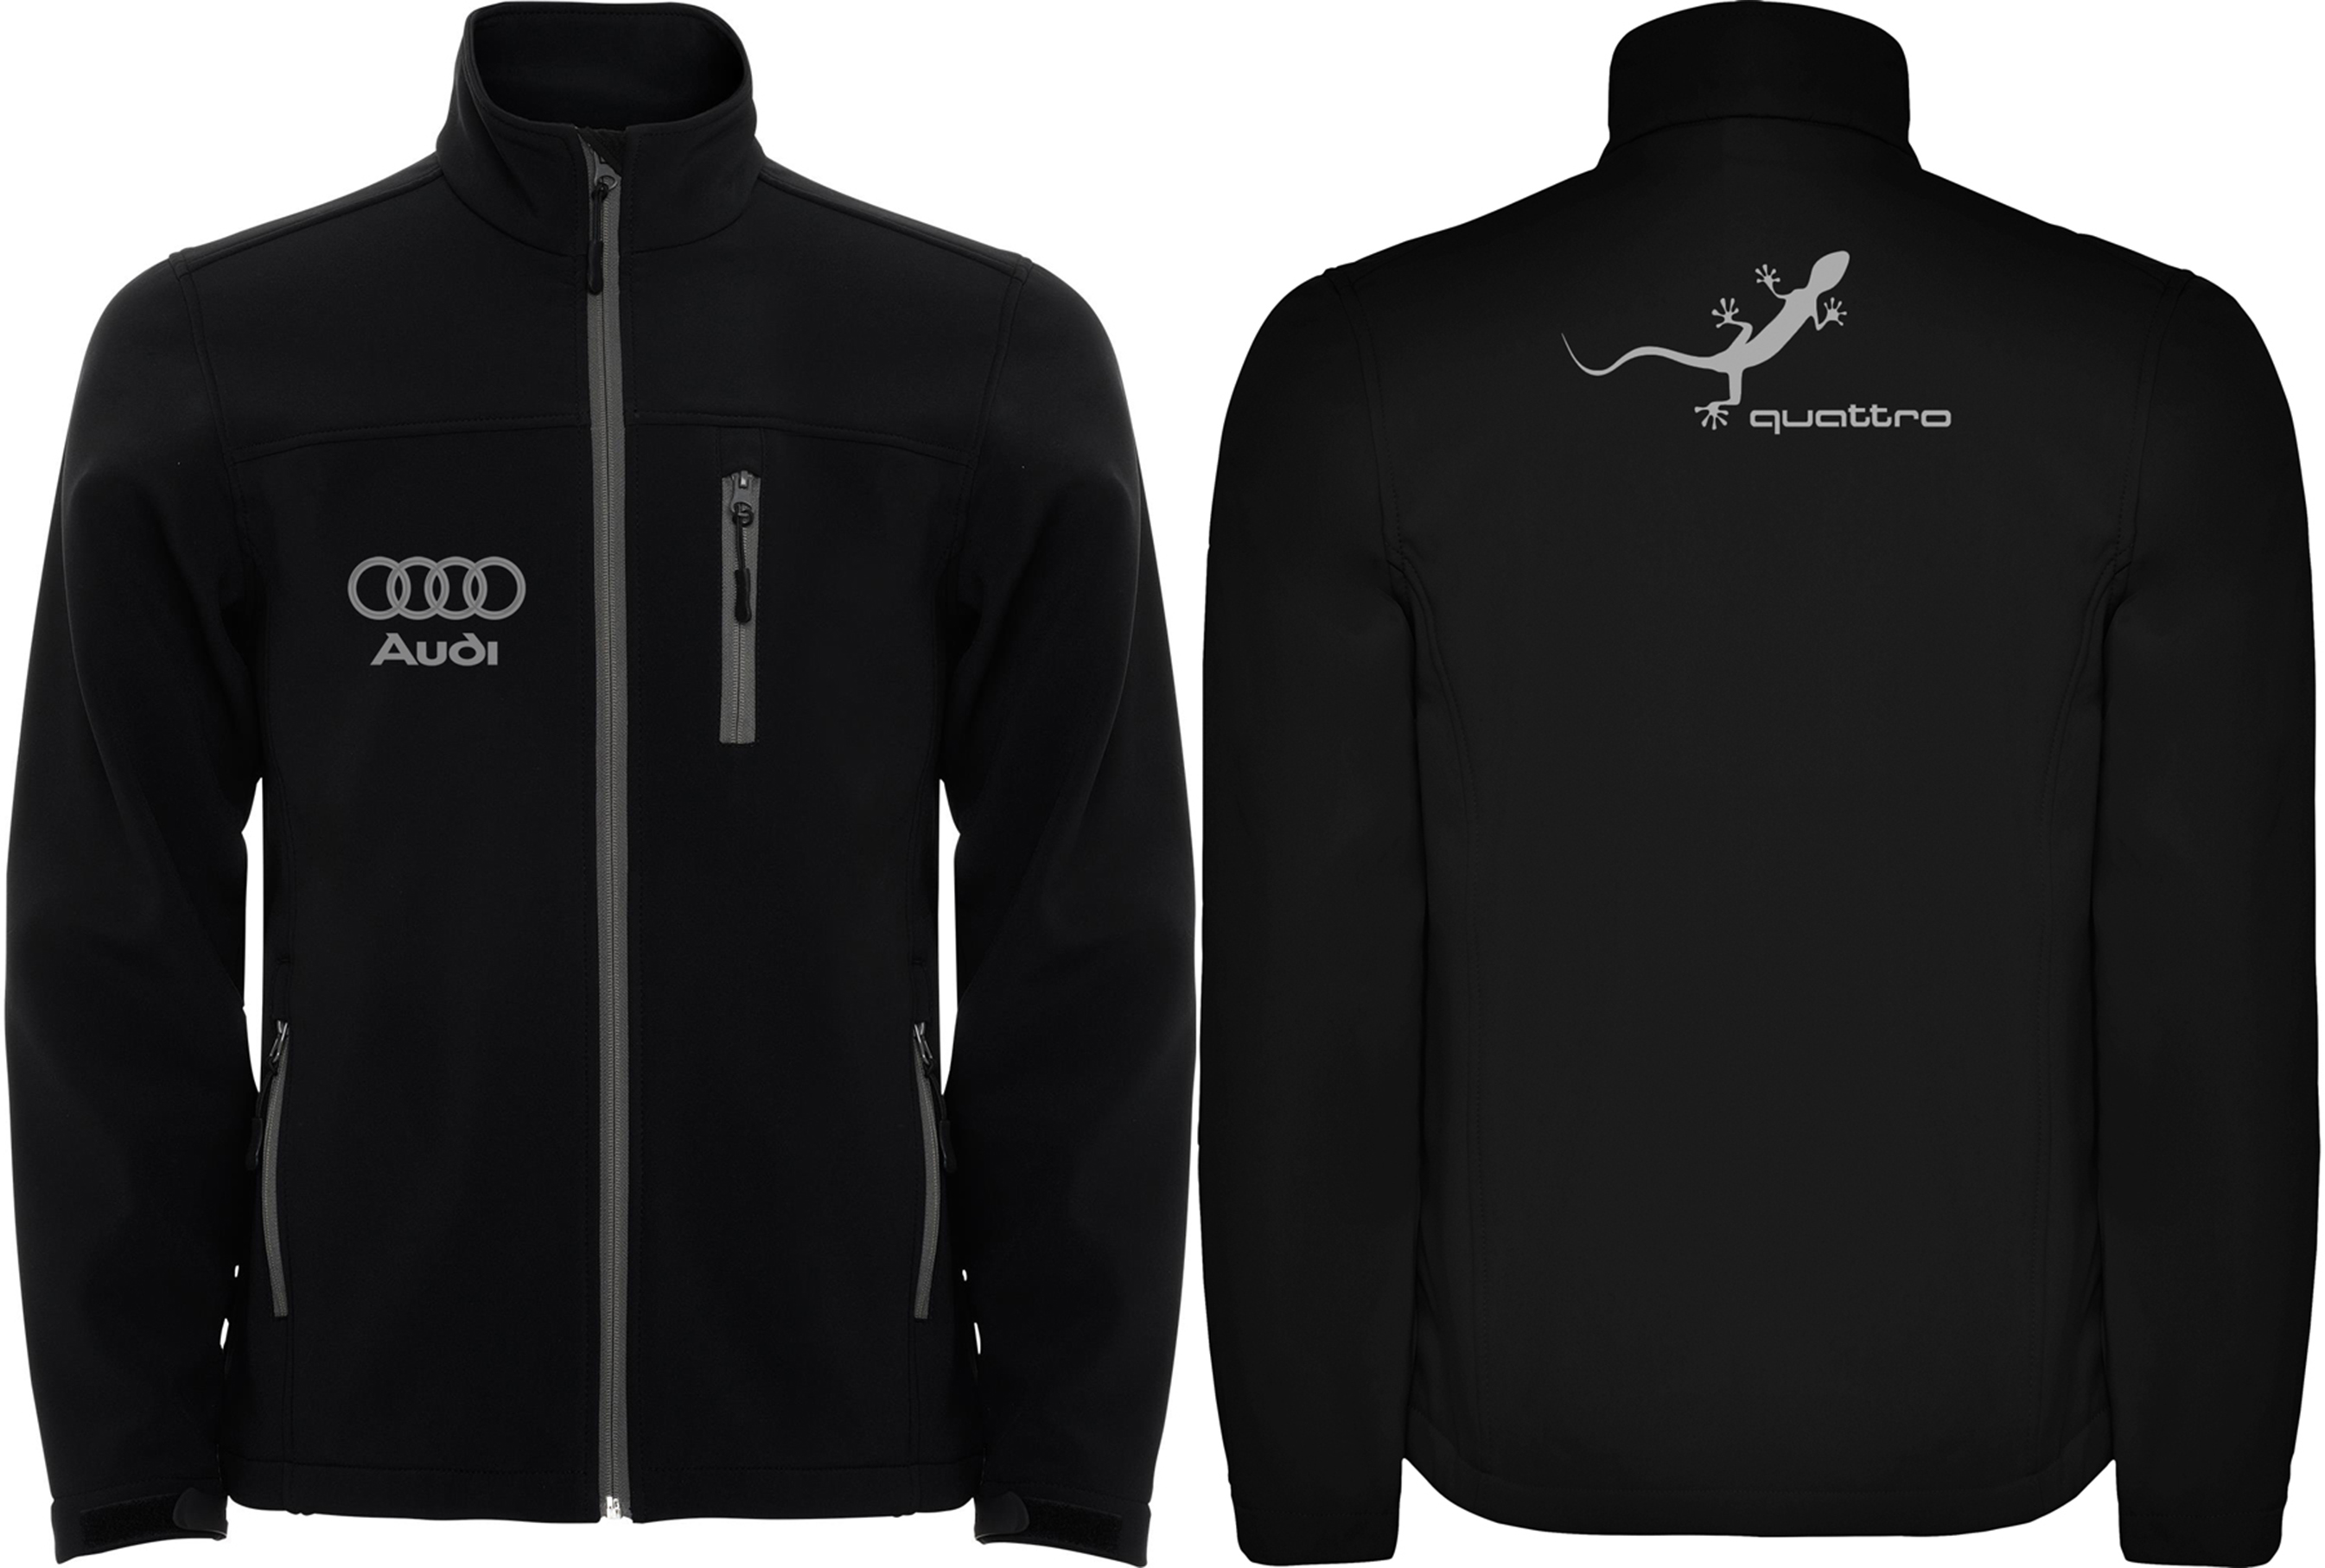 Audi By Quattro VEST Mens Embroidered logo Jacket Сlothing  Apparel Gilet 